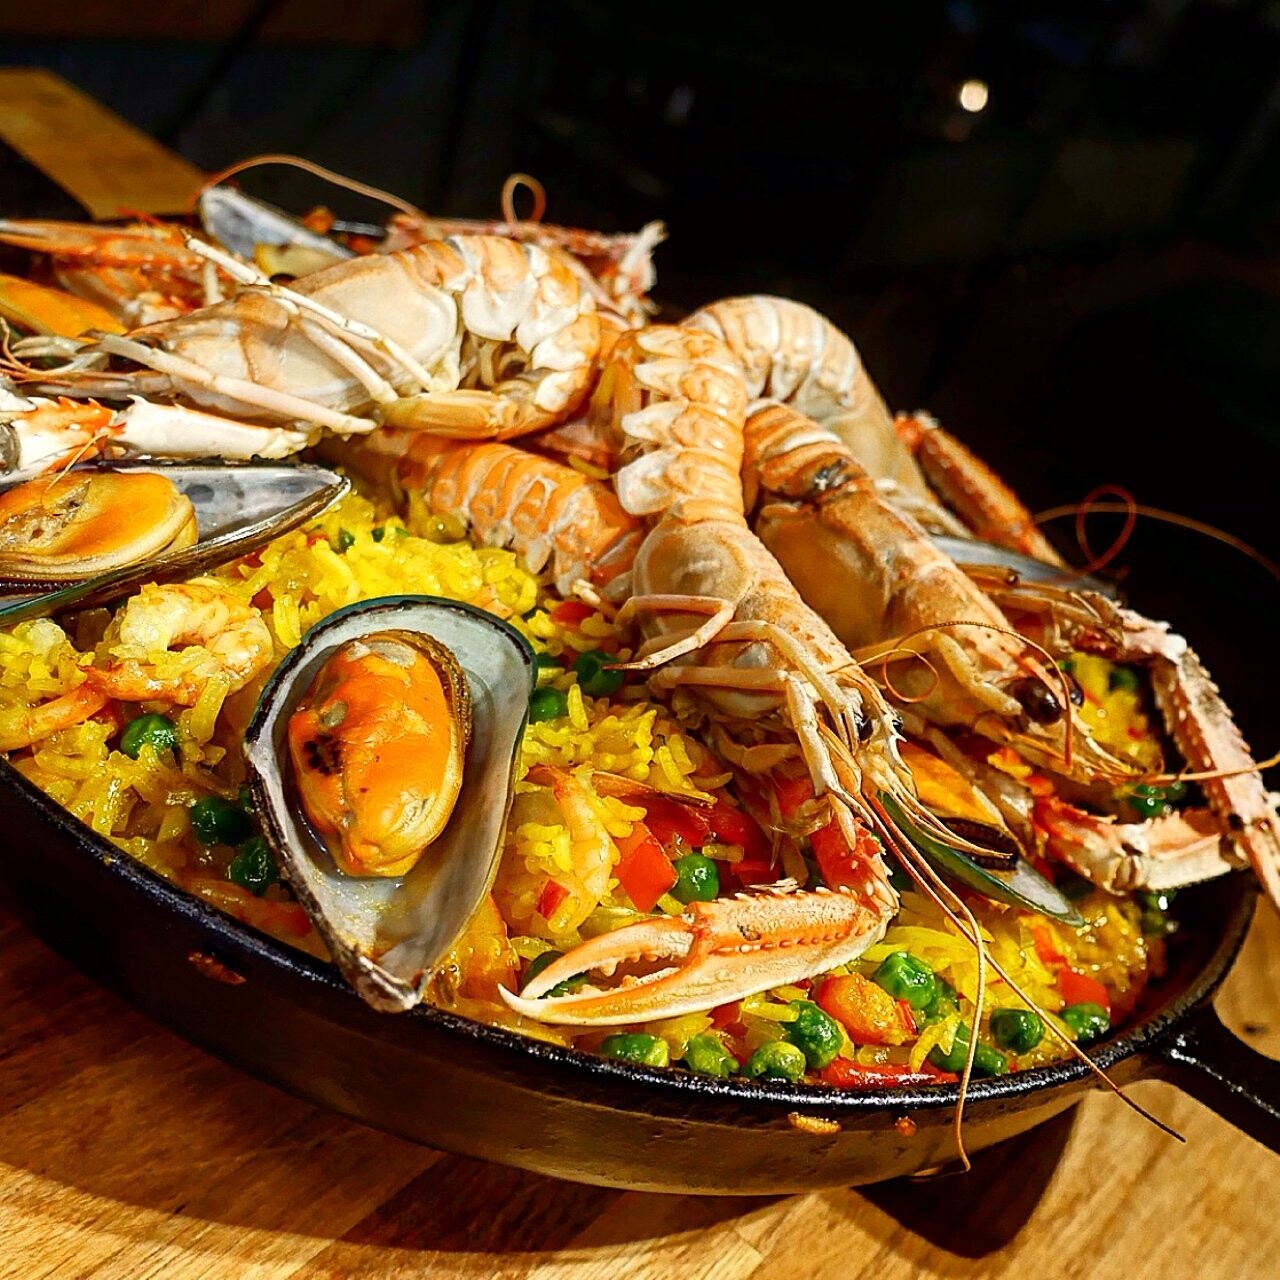 Spanish Paella made for heaven- but made in Sweden by @arnesmat. Saffron, shellfish and clams is a heavenly taste combination and also beautiful for resting your eyes on.